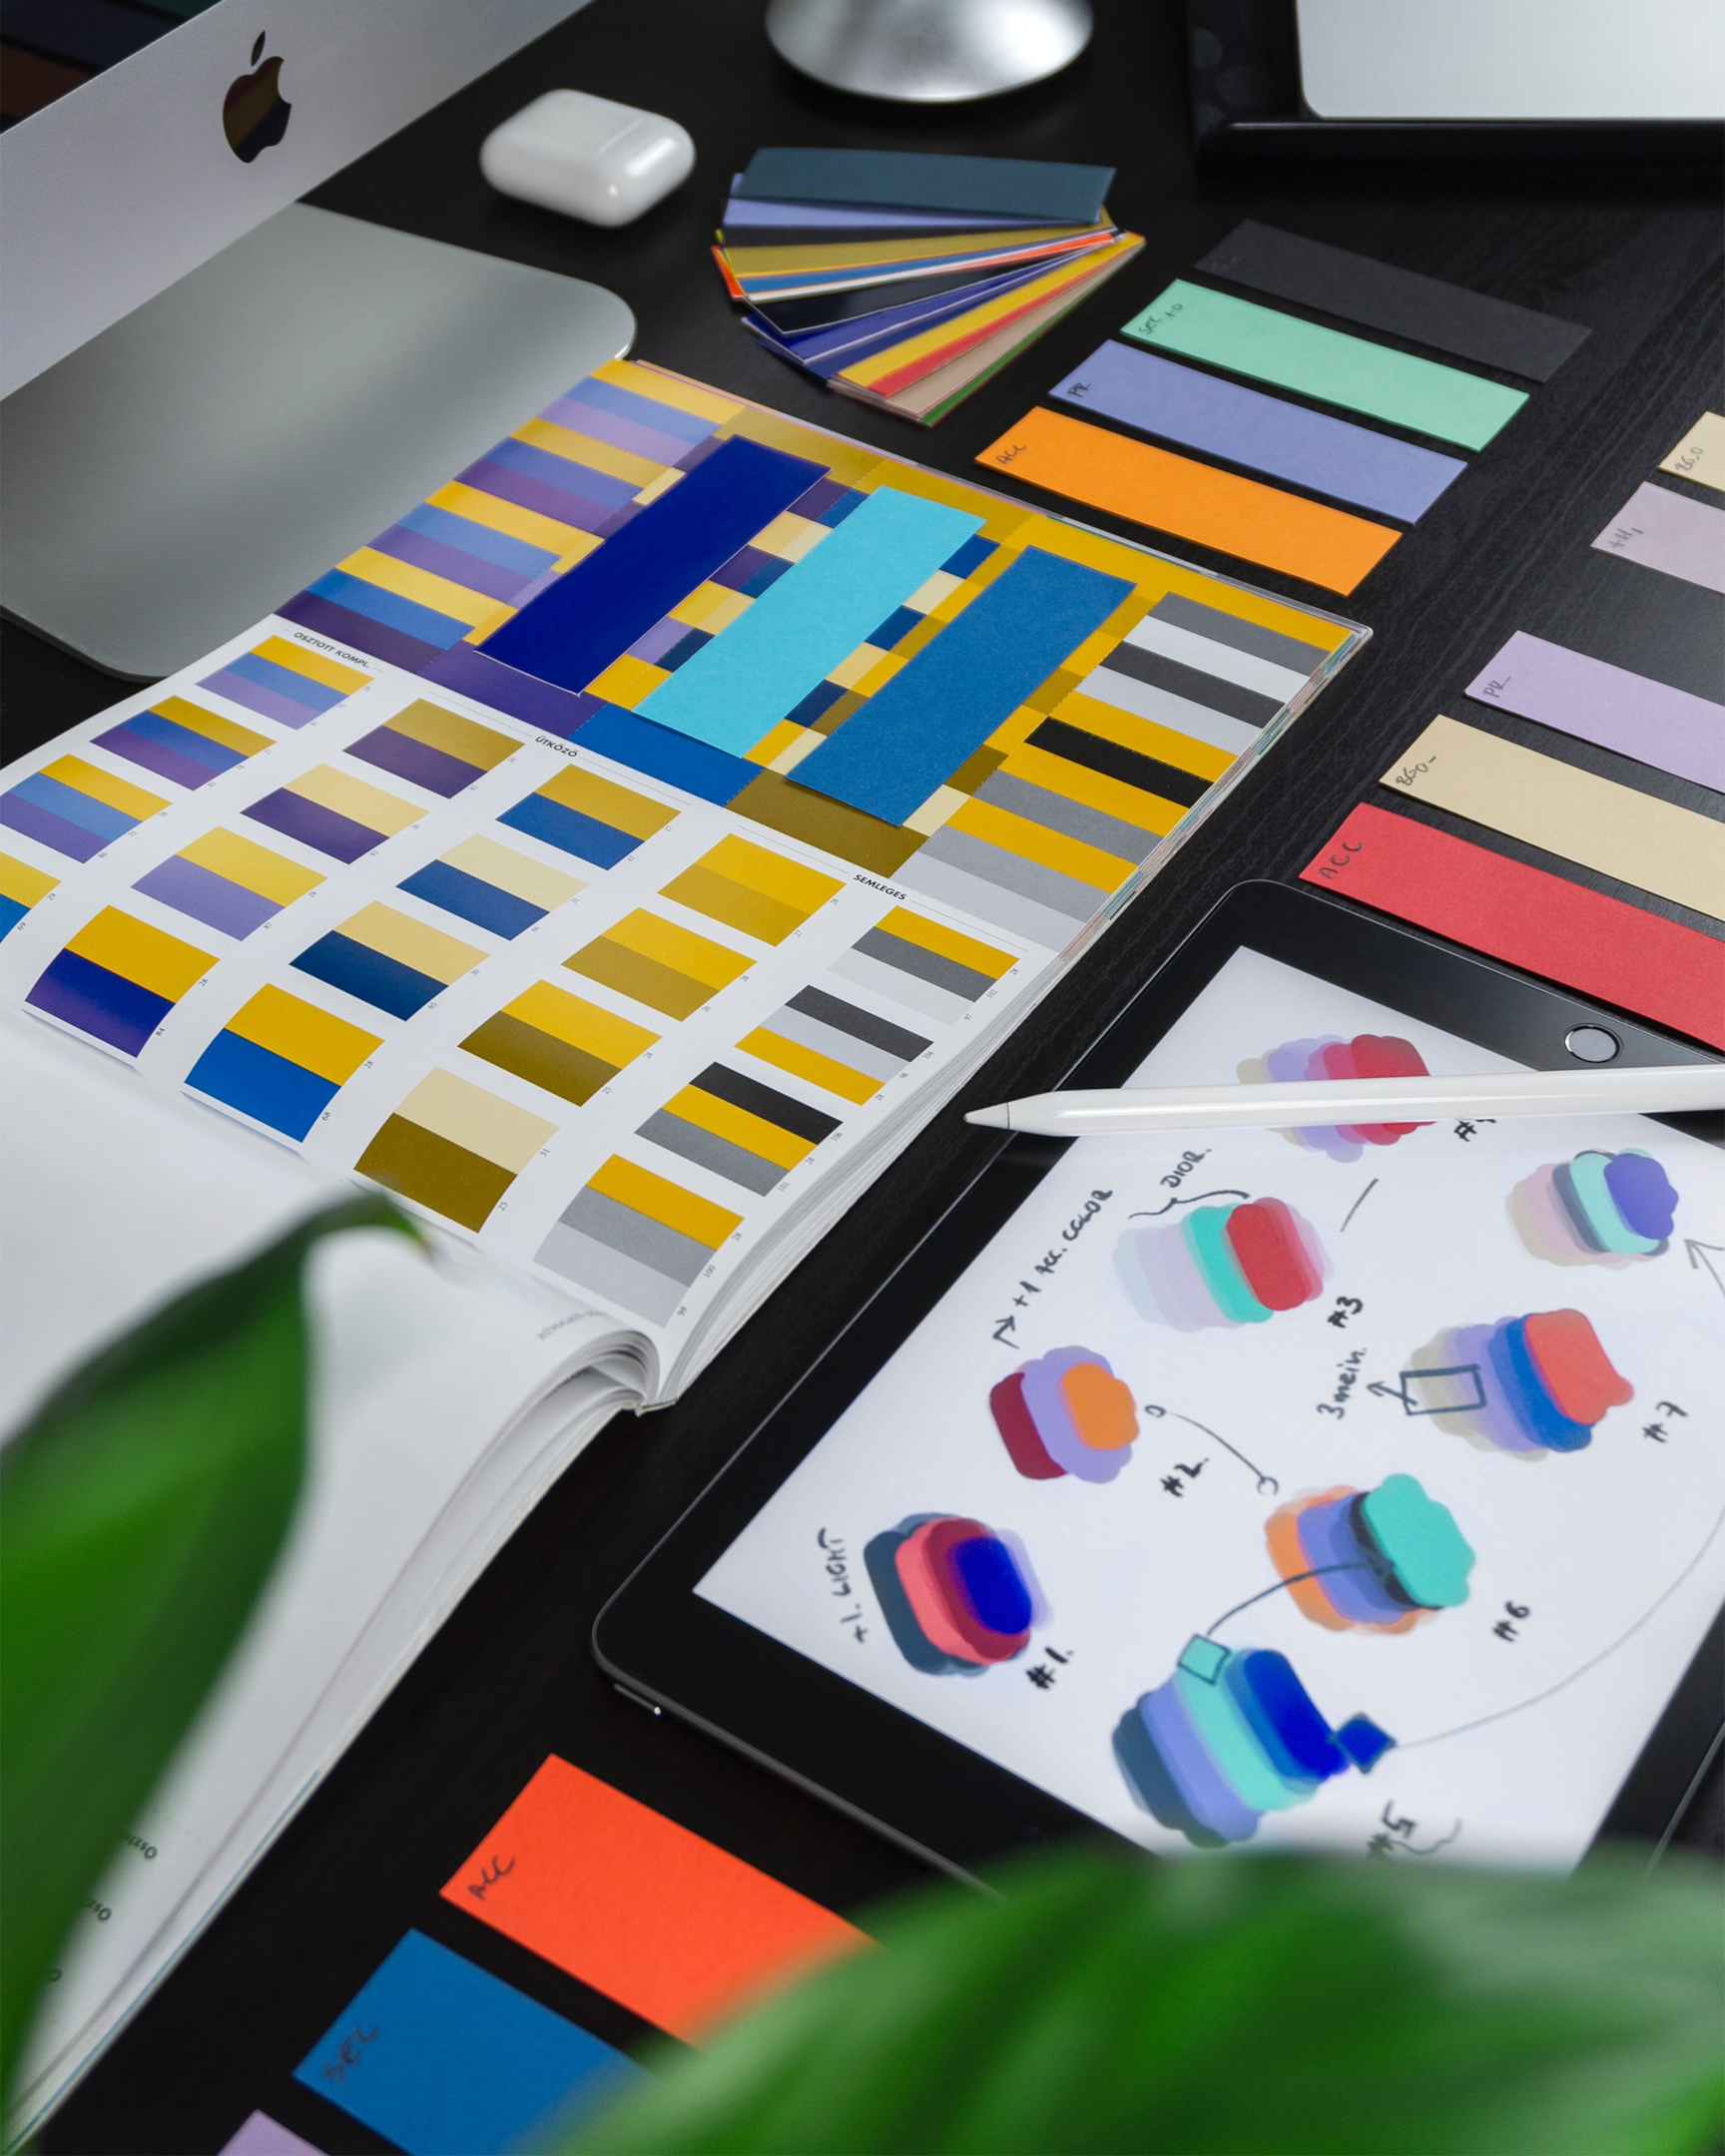 A brand designer tests out different styles and colors for a company's visual identity.